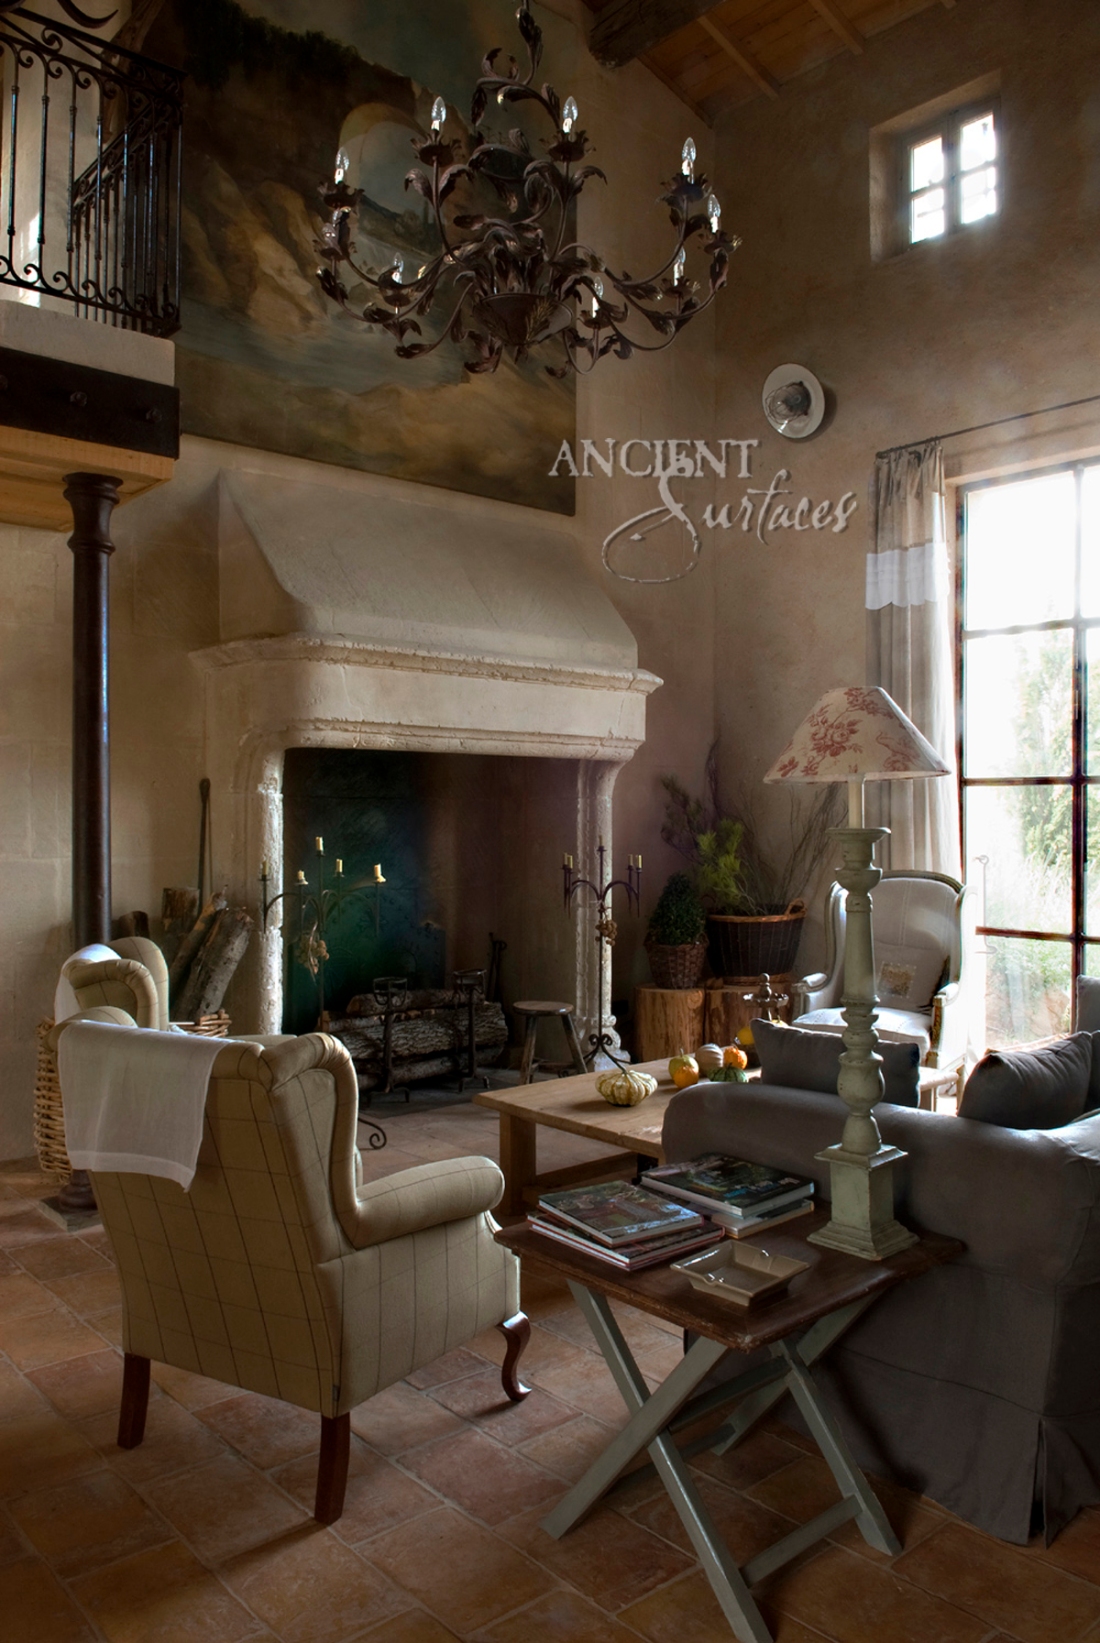 A reclaimed 17th century French Fireplace Mantle from Aix-En-Provence. Reclaimed and sold by Ancient Surfaces.